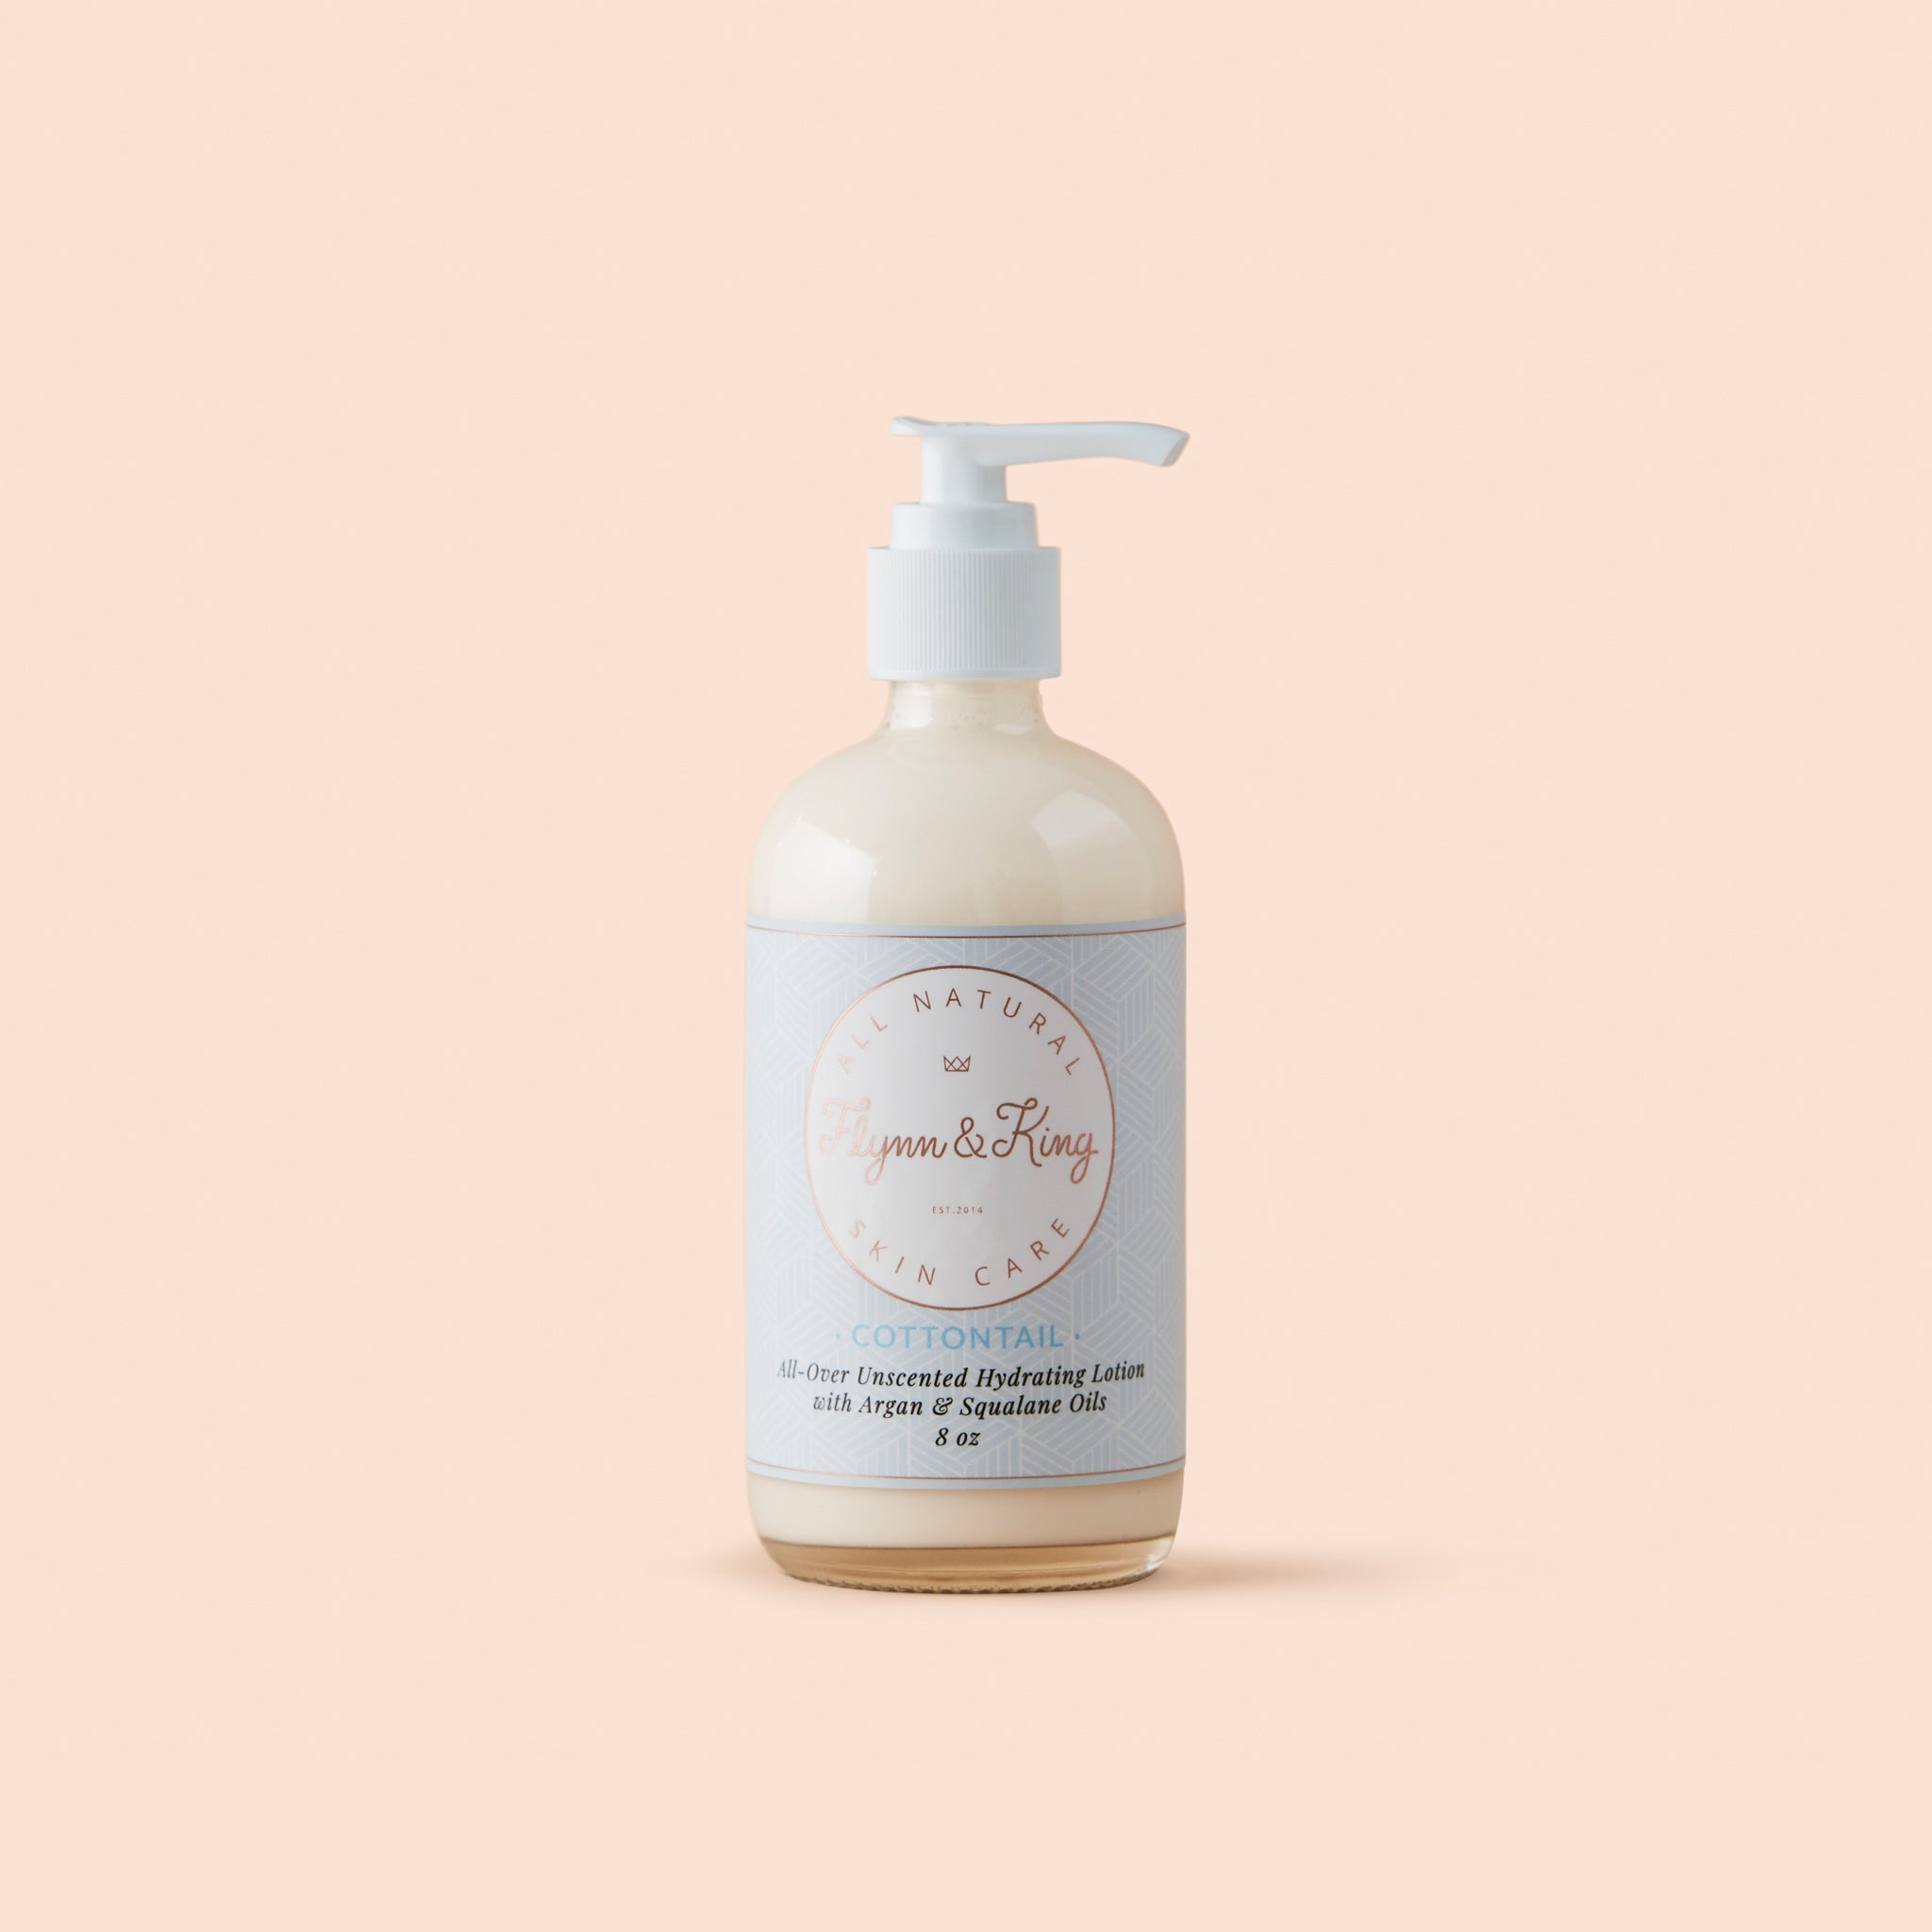 TRAVEL SIZE COTTONTAIL - All-Over Unscented Hydrating Lotion with Argan & Squalane Oils - New Item